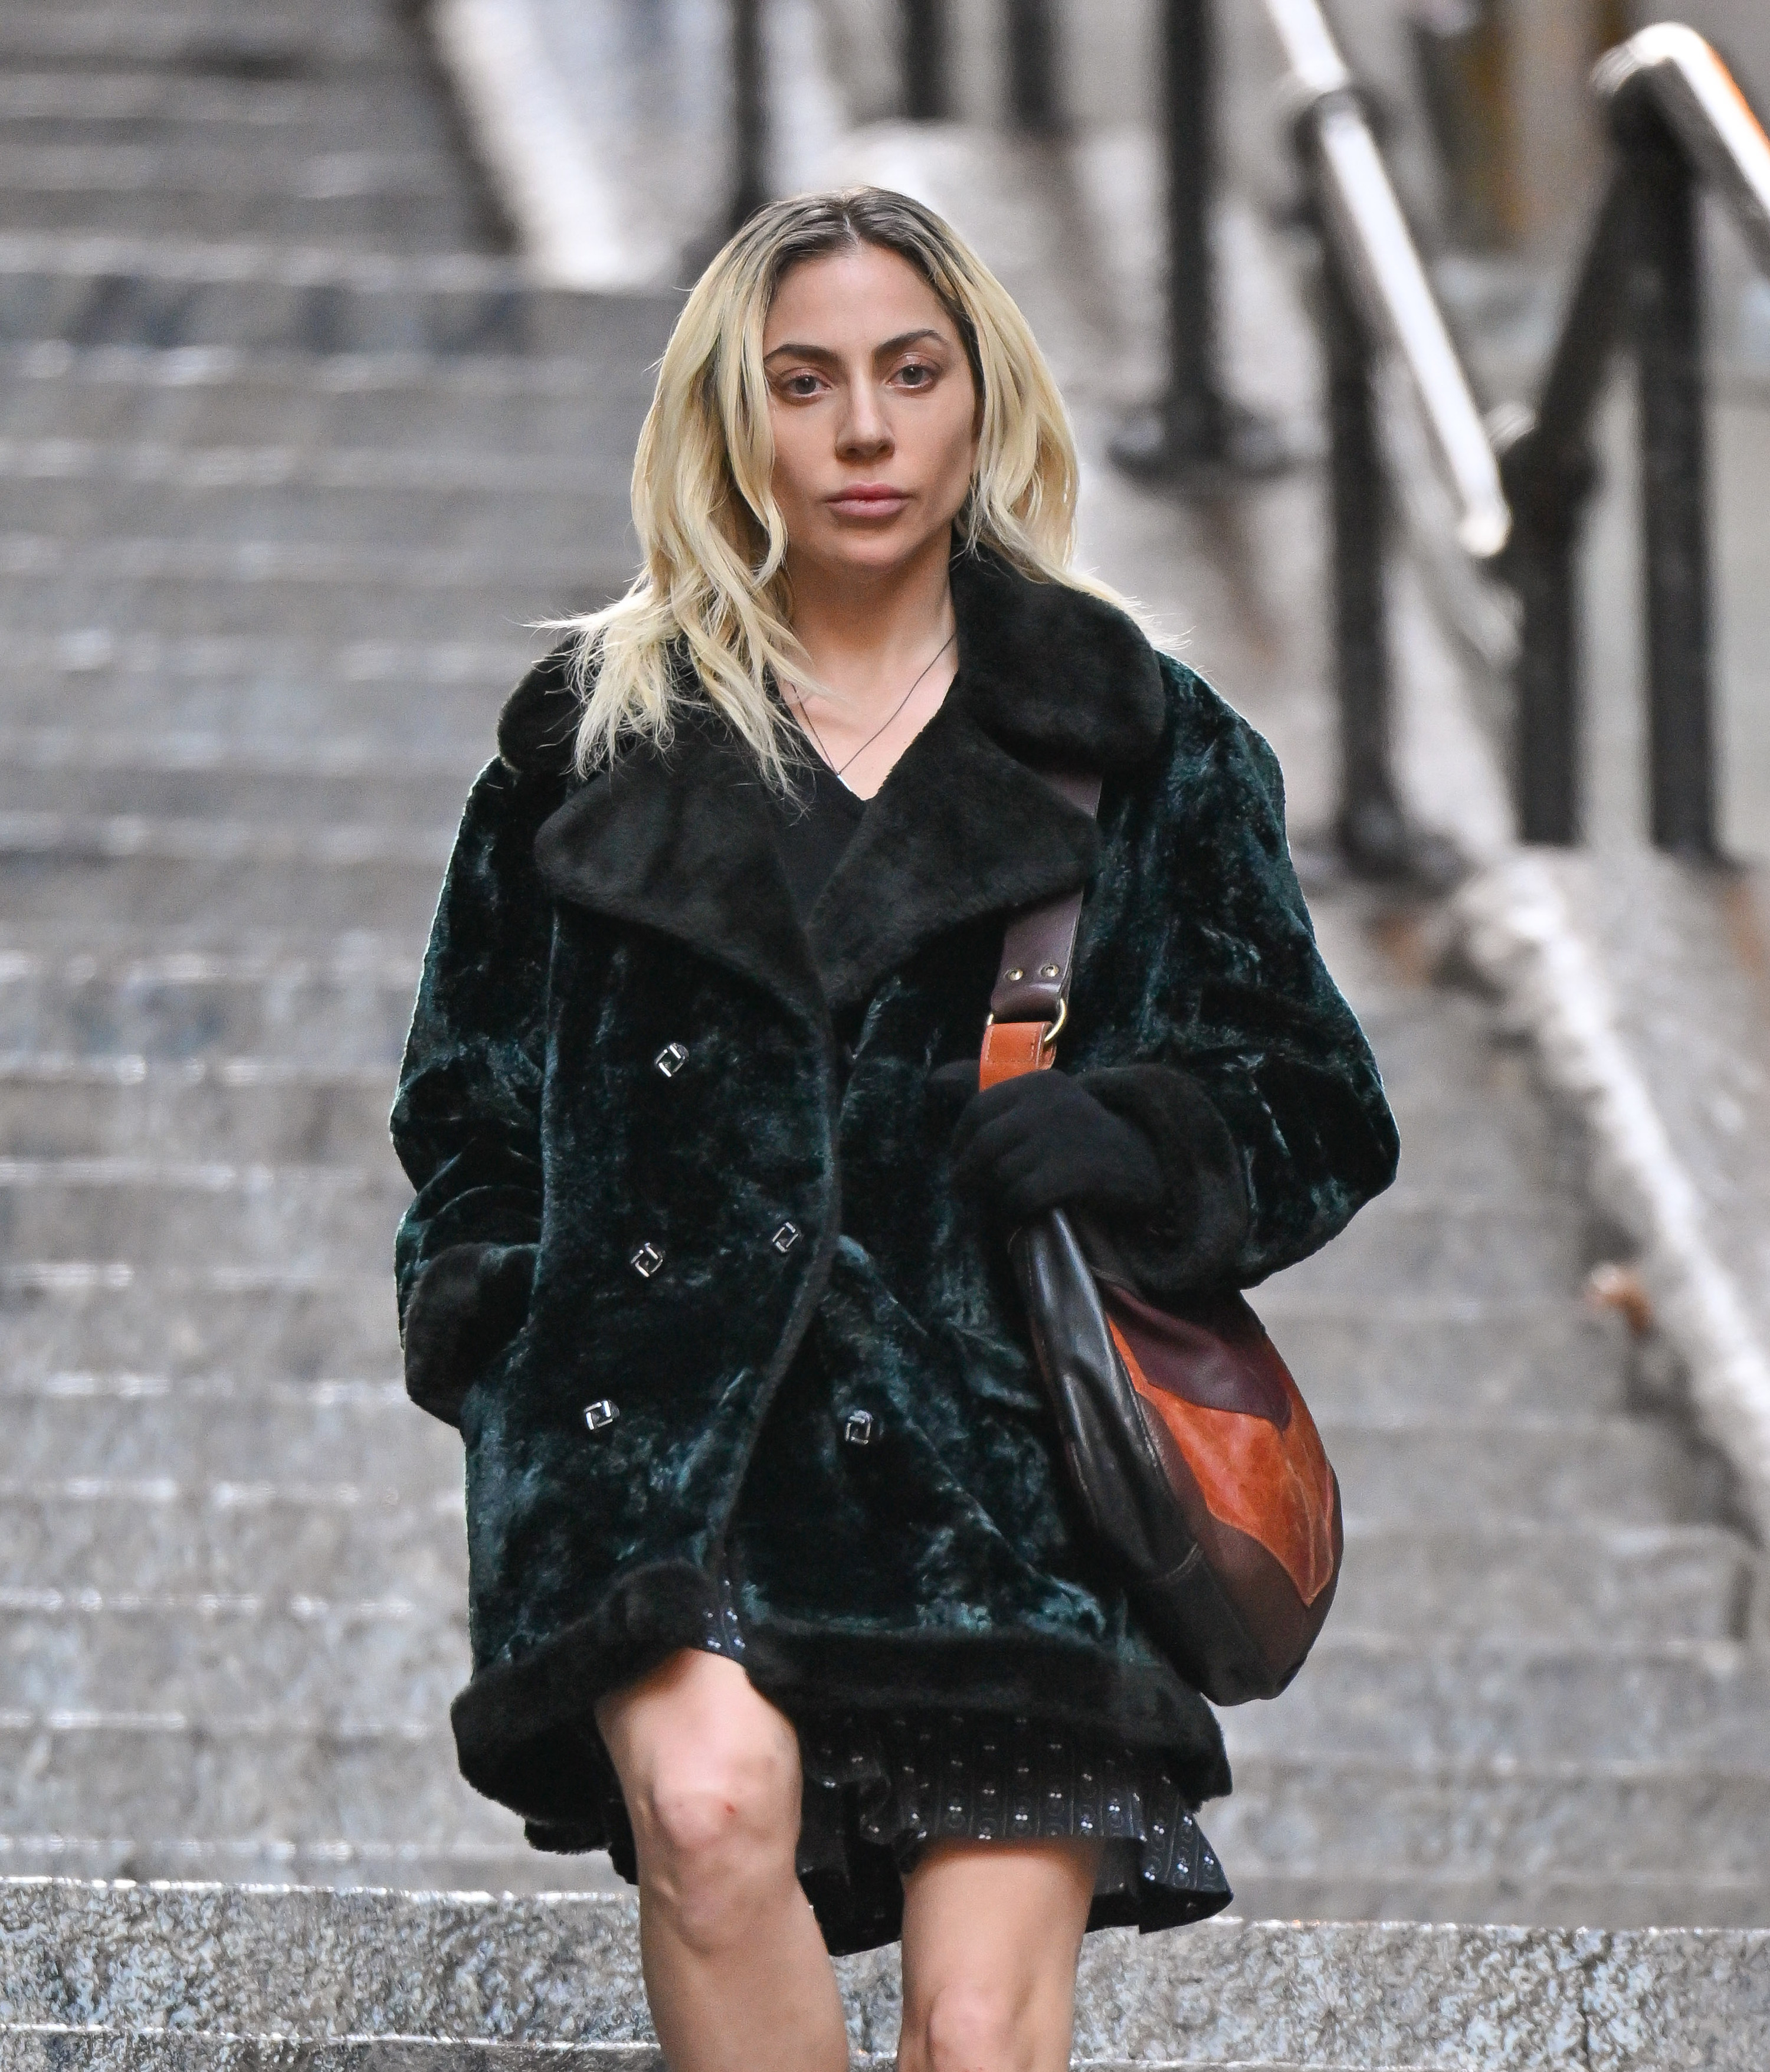 An image of Lady Gaga looking solemn with smudged makeup